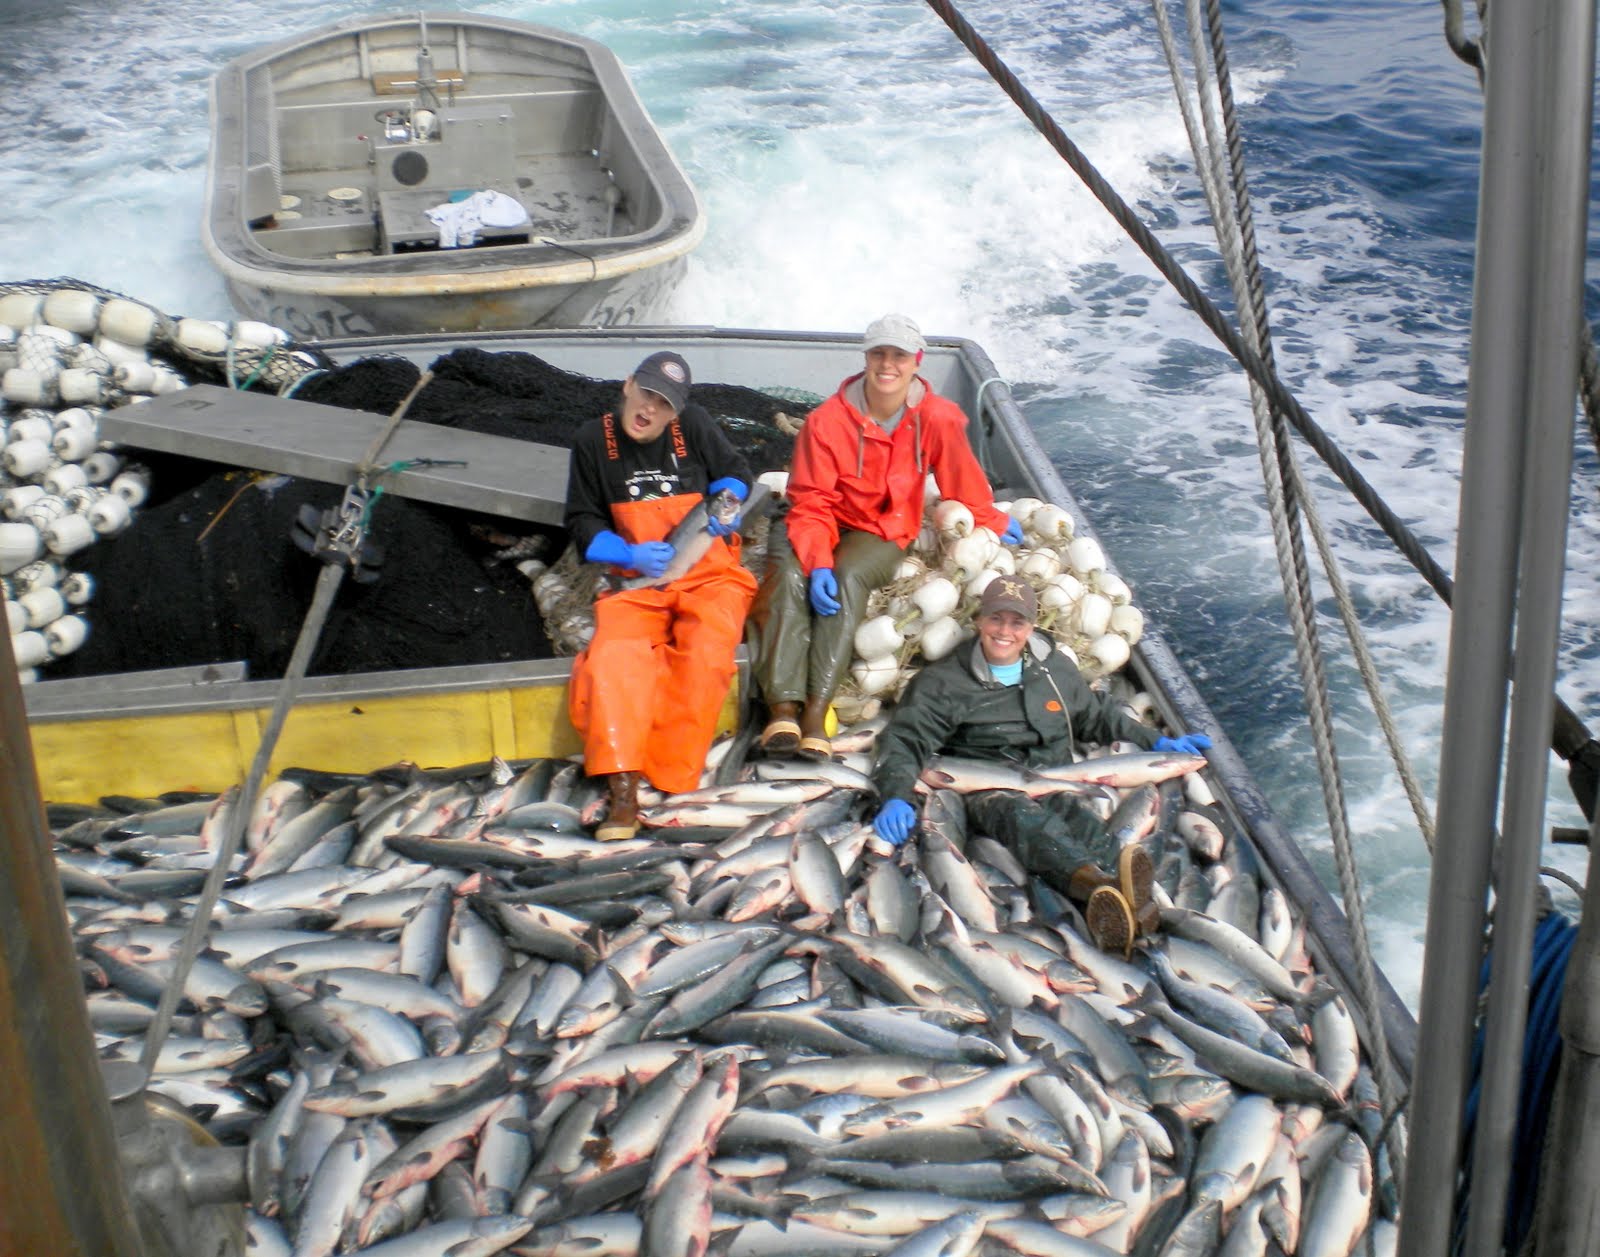 The Fish Came Back From Our Restored Ocean Pasture Producing The Largest Catch Of Salmon In Alaskan History